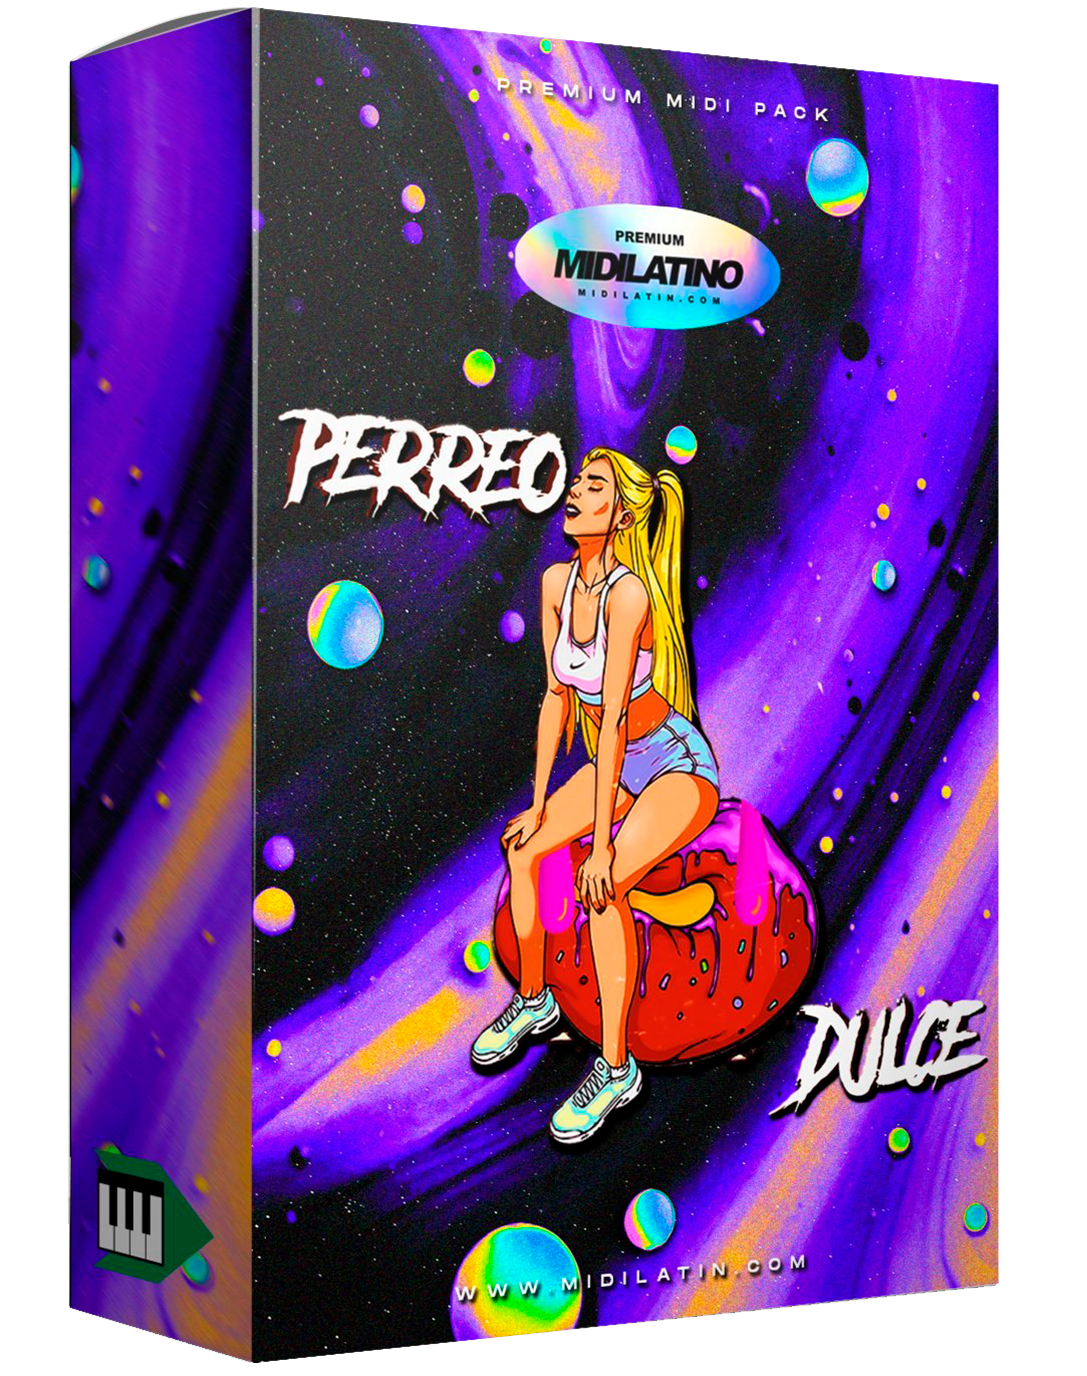 DULCE_PERREO_MIDI_PACK.png__PID:26dfb1aa-d4f3-4f5d-98a8-be8882c5af78